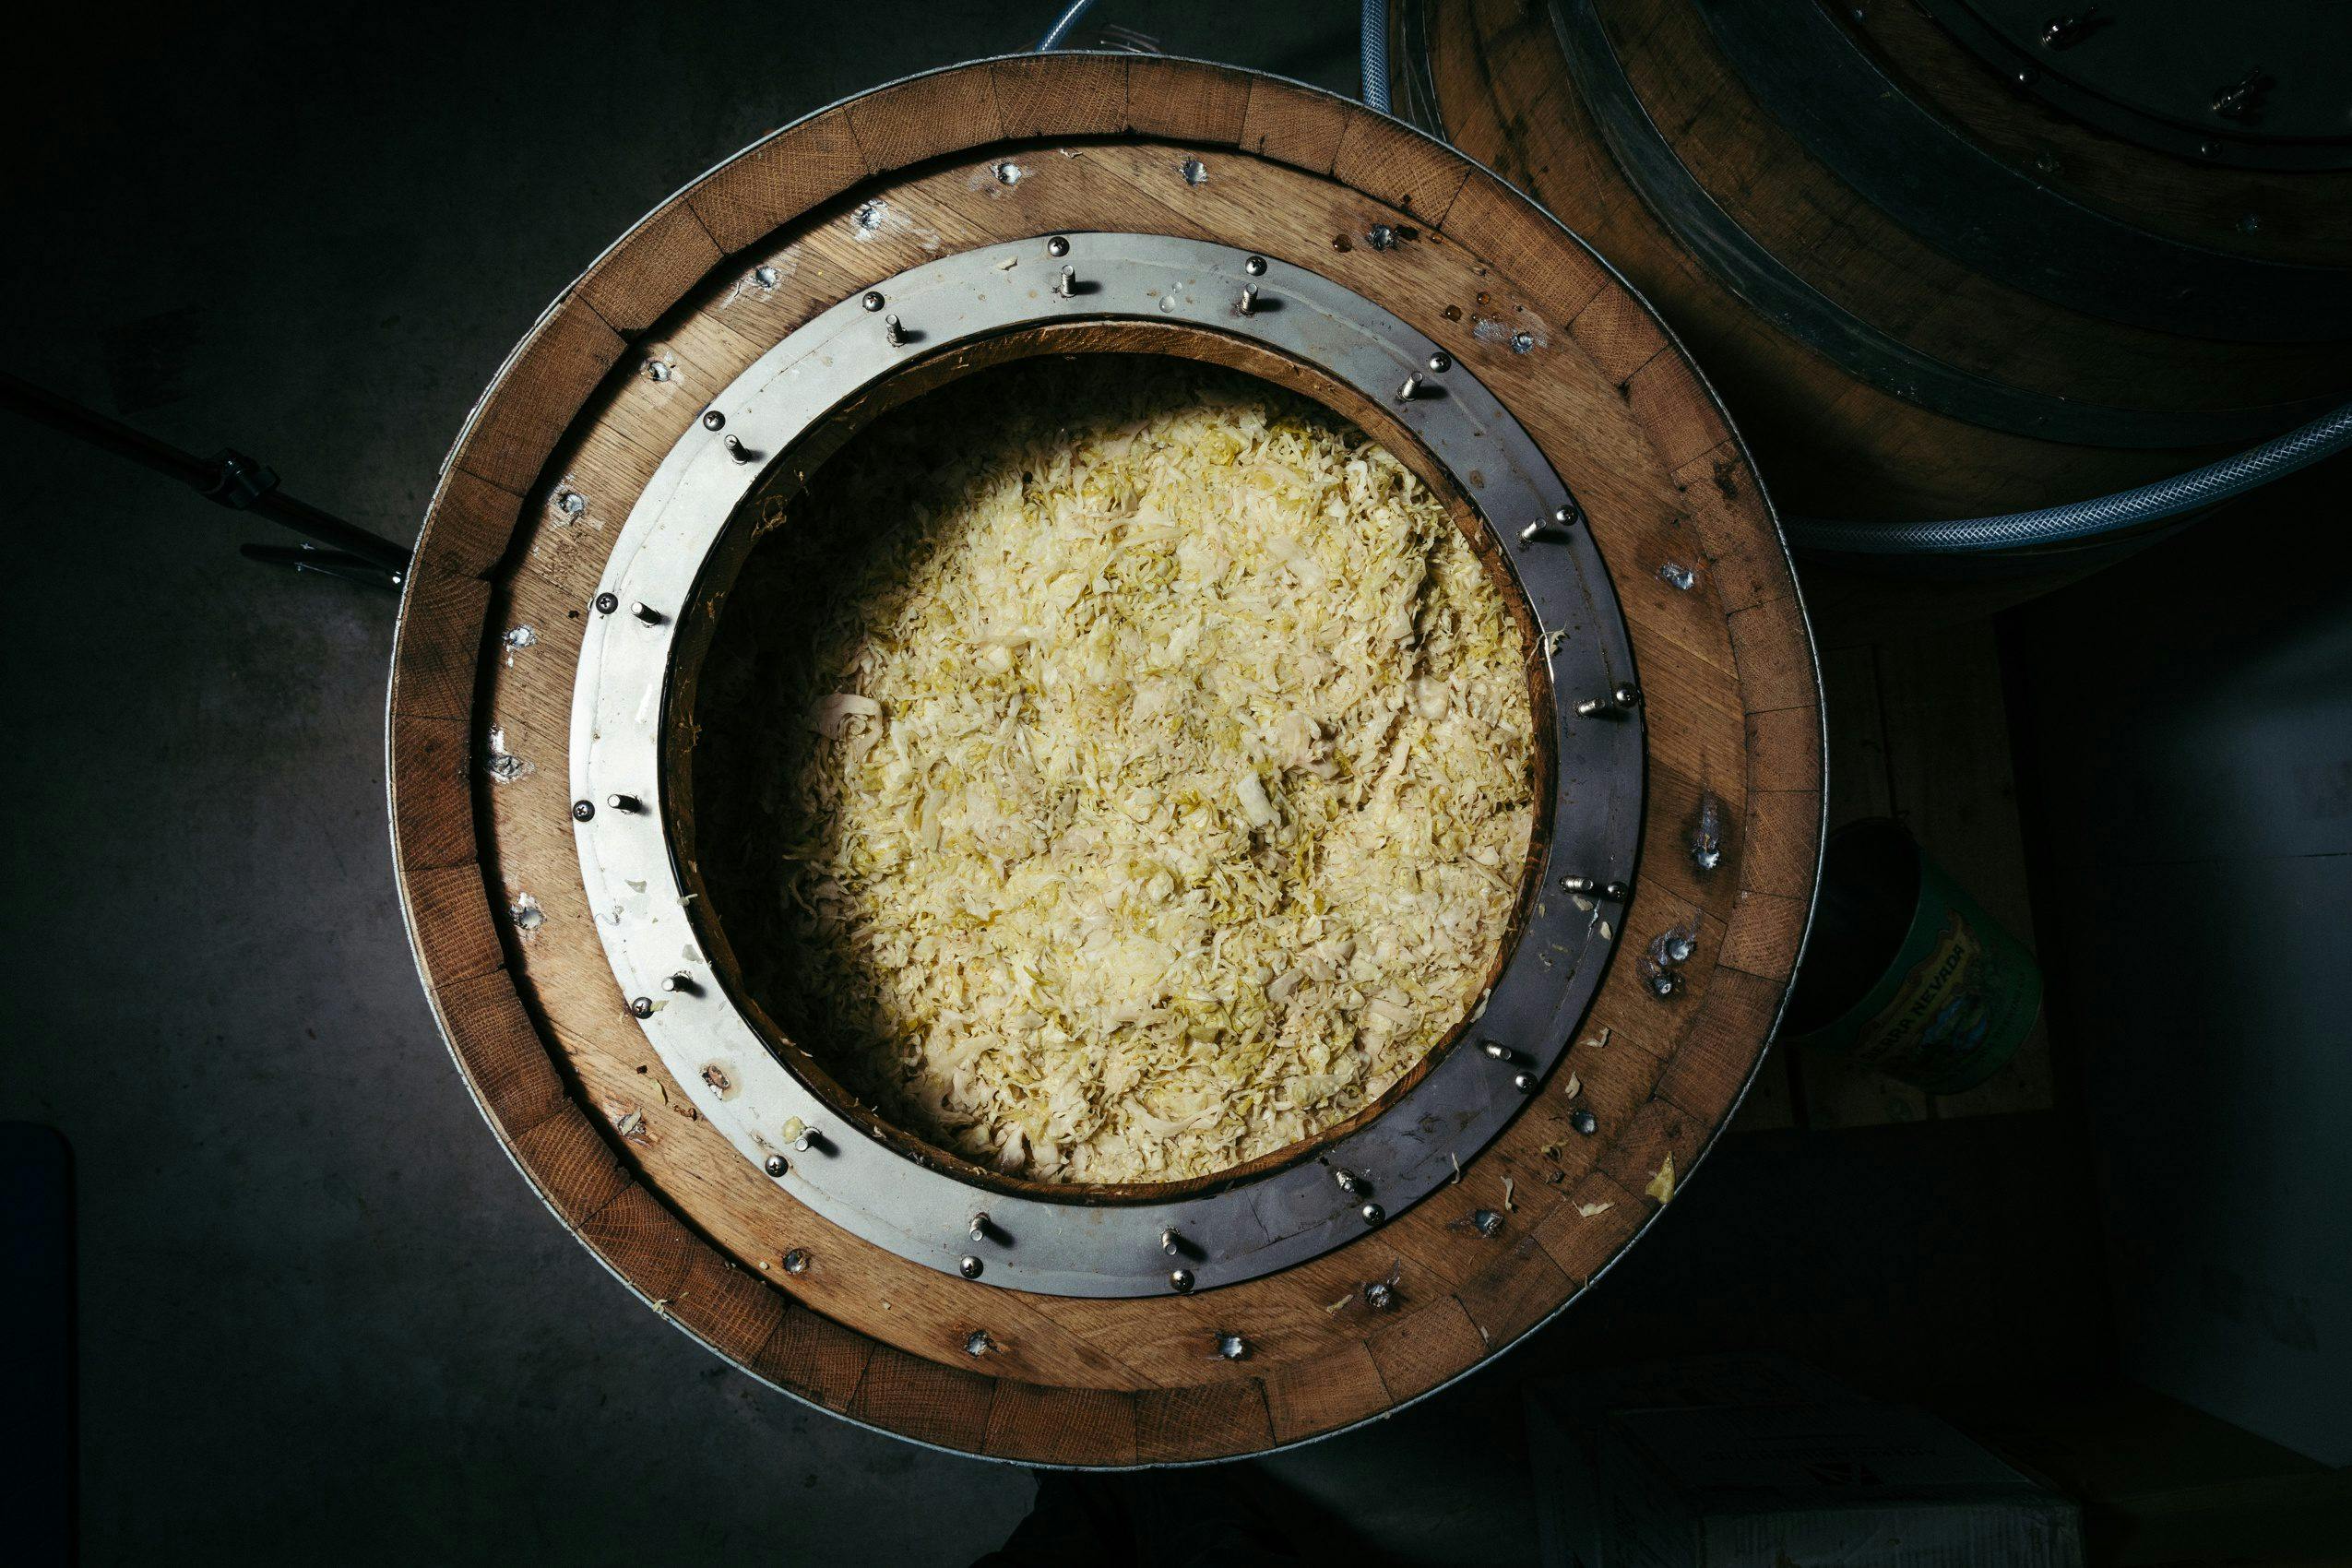 A chef pulling a handful of sauerkraut out of a beer barrel